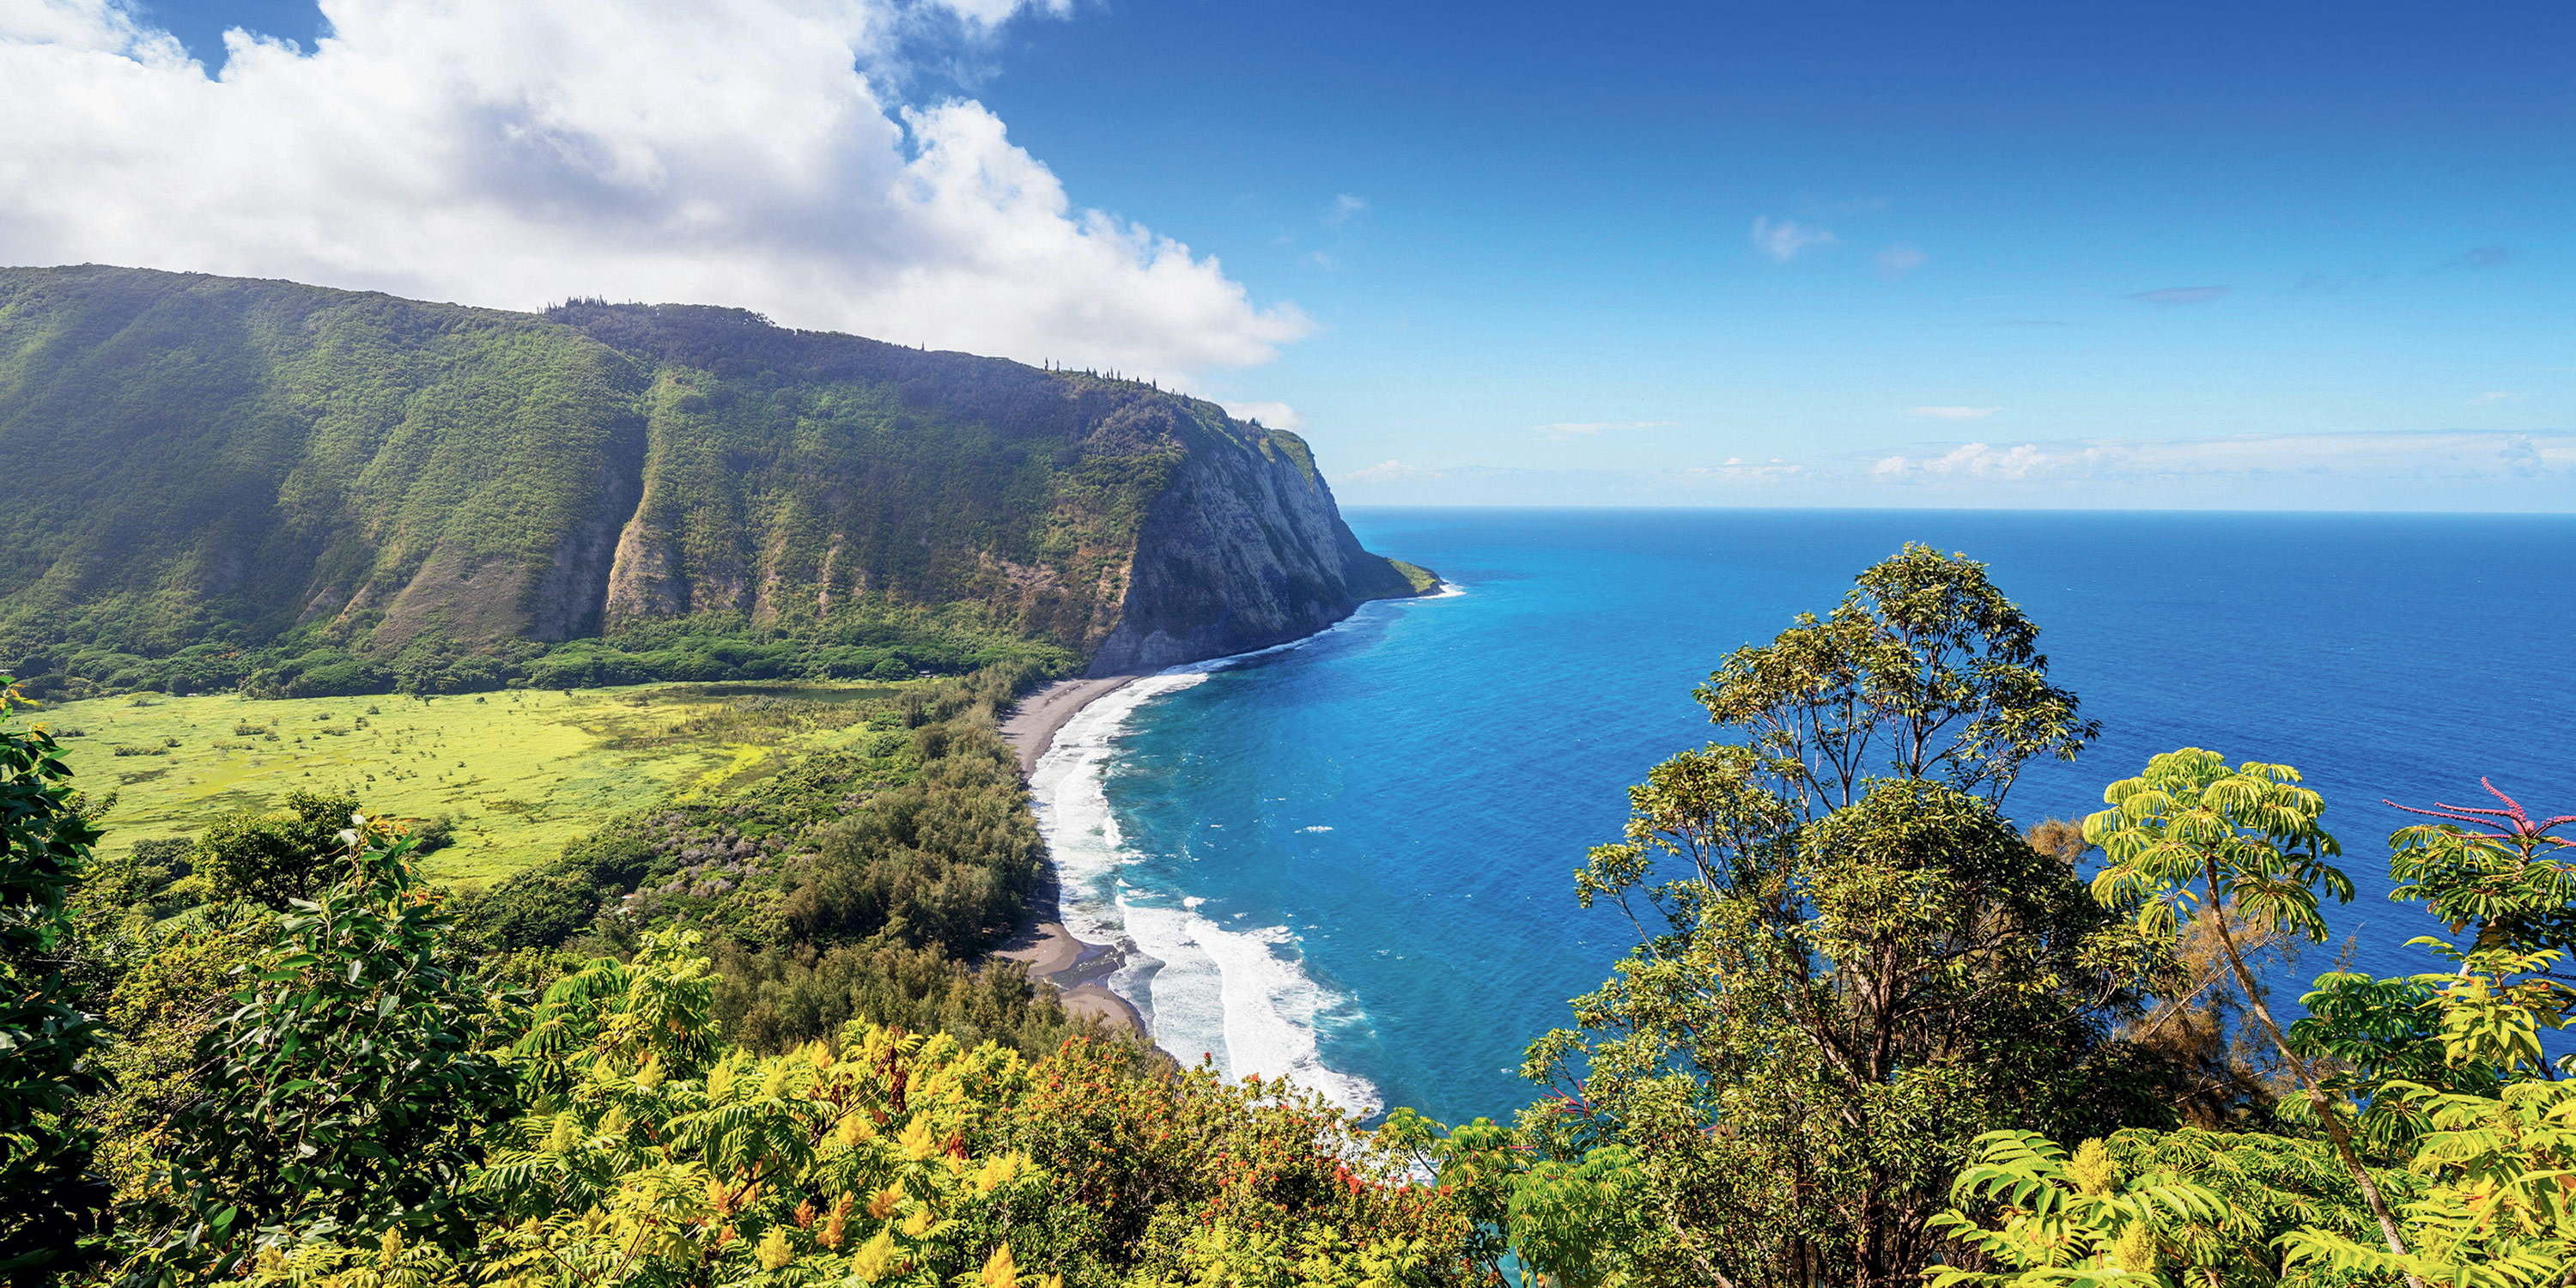 Hawaii Covid19 Travel Restrictions and What to Expect Via